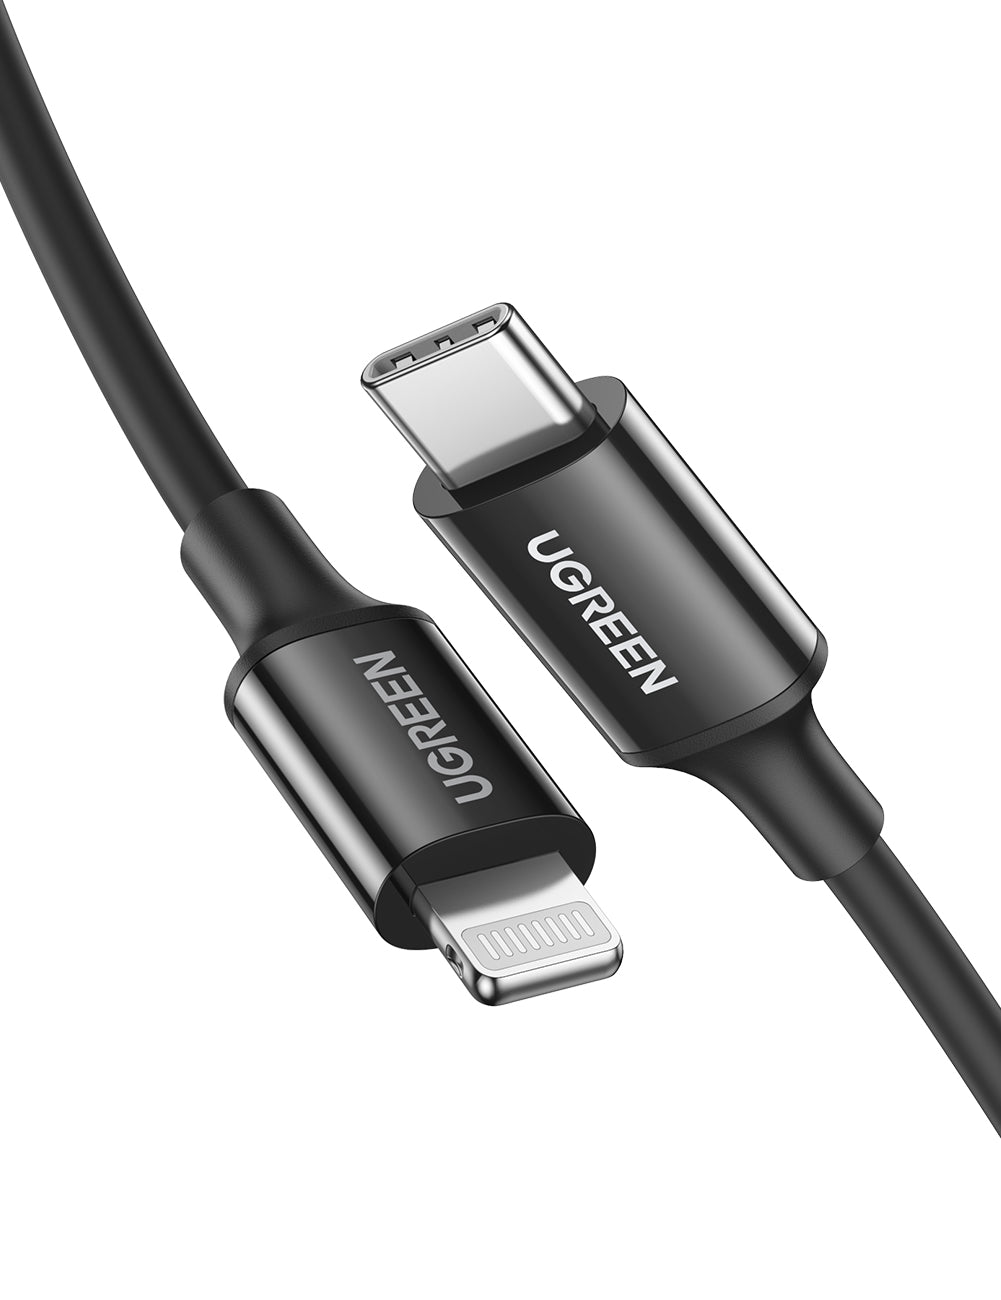 UGREEN USB-C TO LIGHTNING (PD) FAST CHARGING 3.0A MFI CABLE M/M  RUBBER SHELL / NECLE PLATING 1M - BLACK